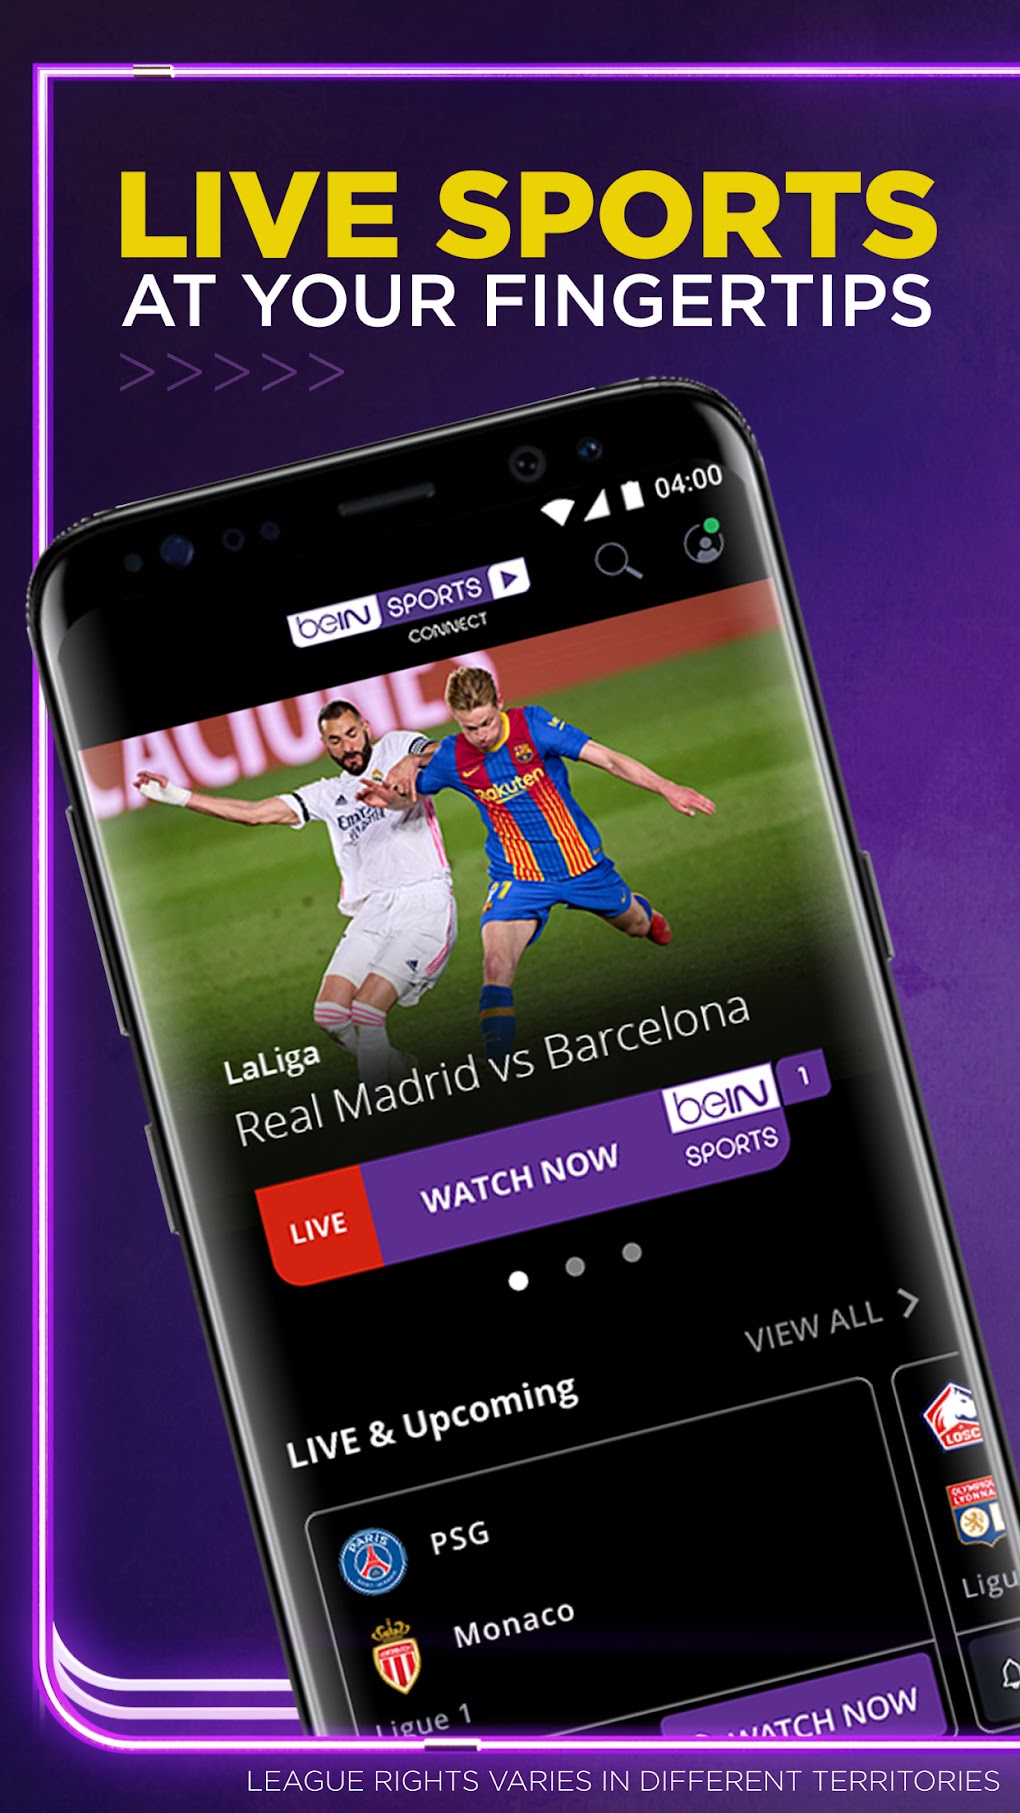 beIN SPORTS CONNECT - Truth in Advertising